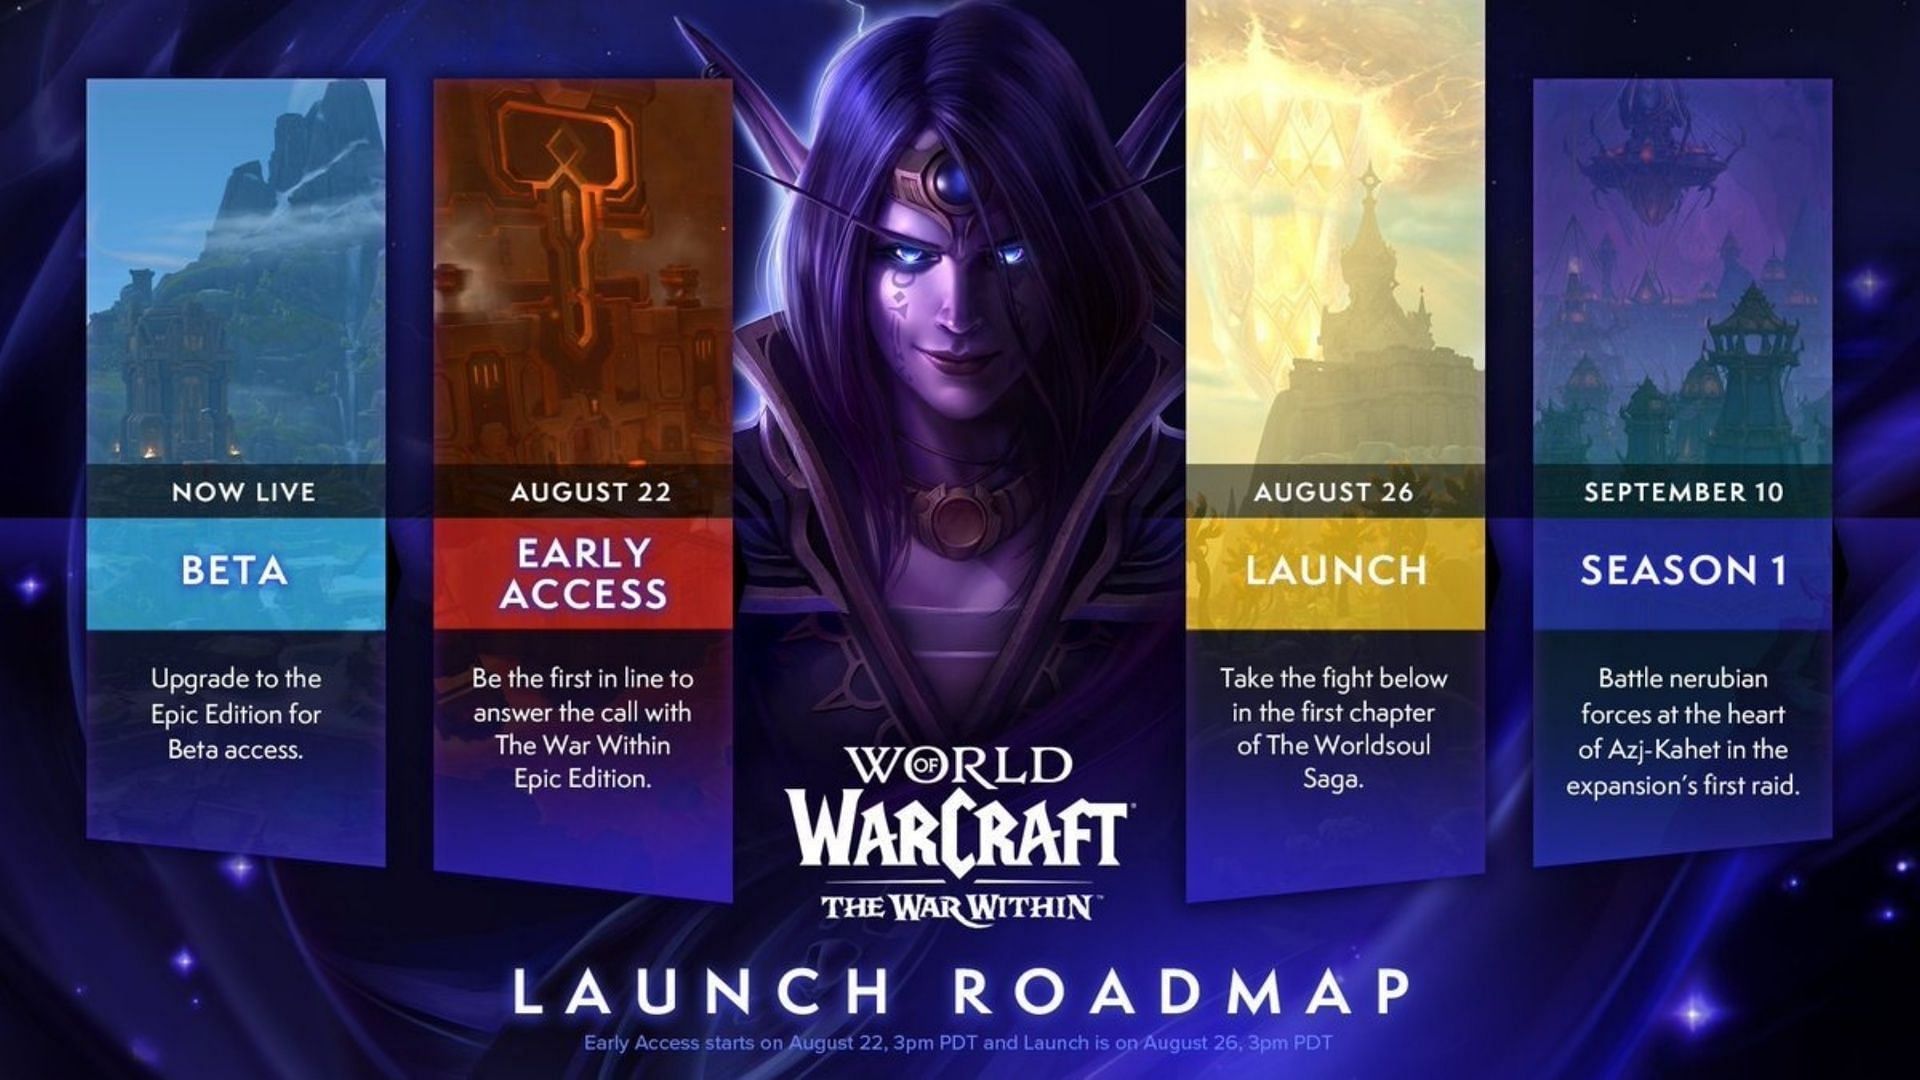 The official roadmap for the Road to The War Within has been revealed (Image via Blizzard Entertainment)